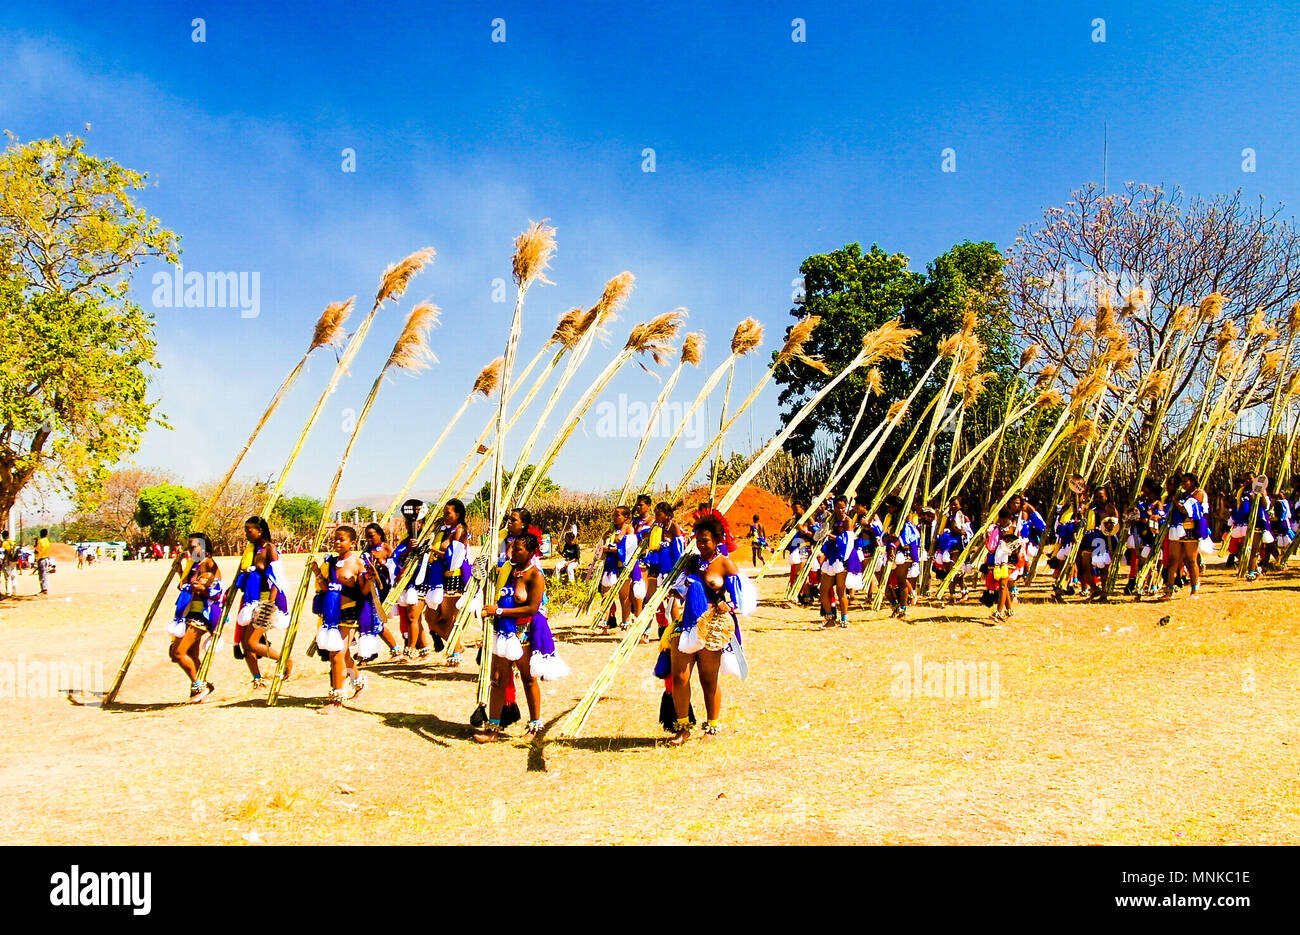 Women In Traditional Costumes Marching At The Umhlanga Aka Reed Dance Ceremony 01 09 2013